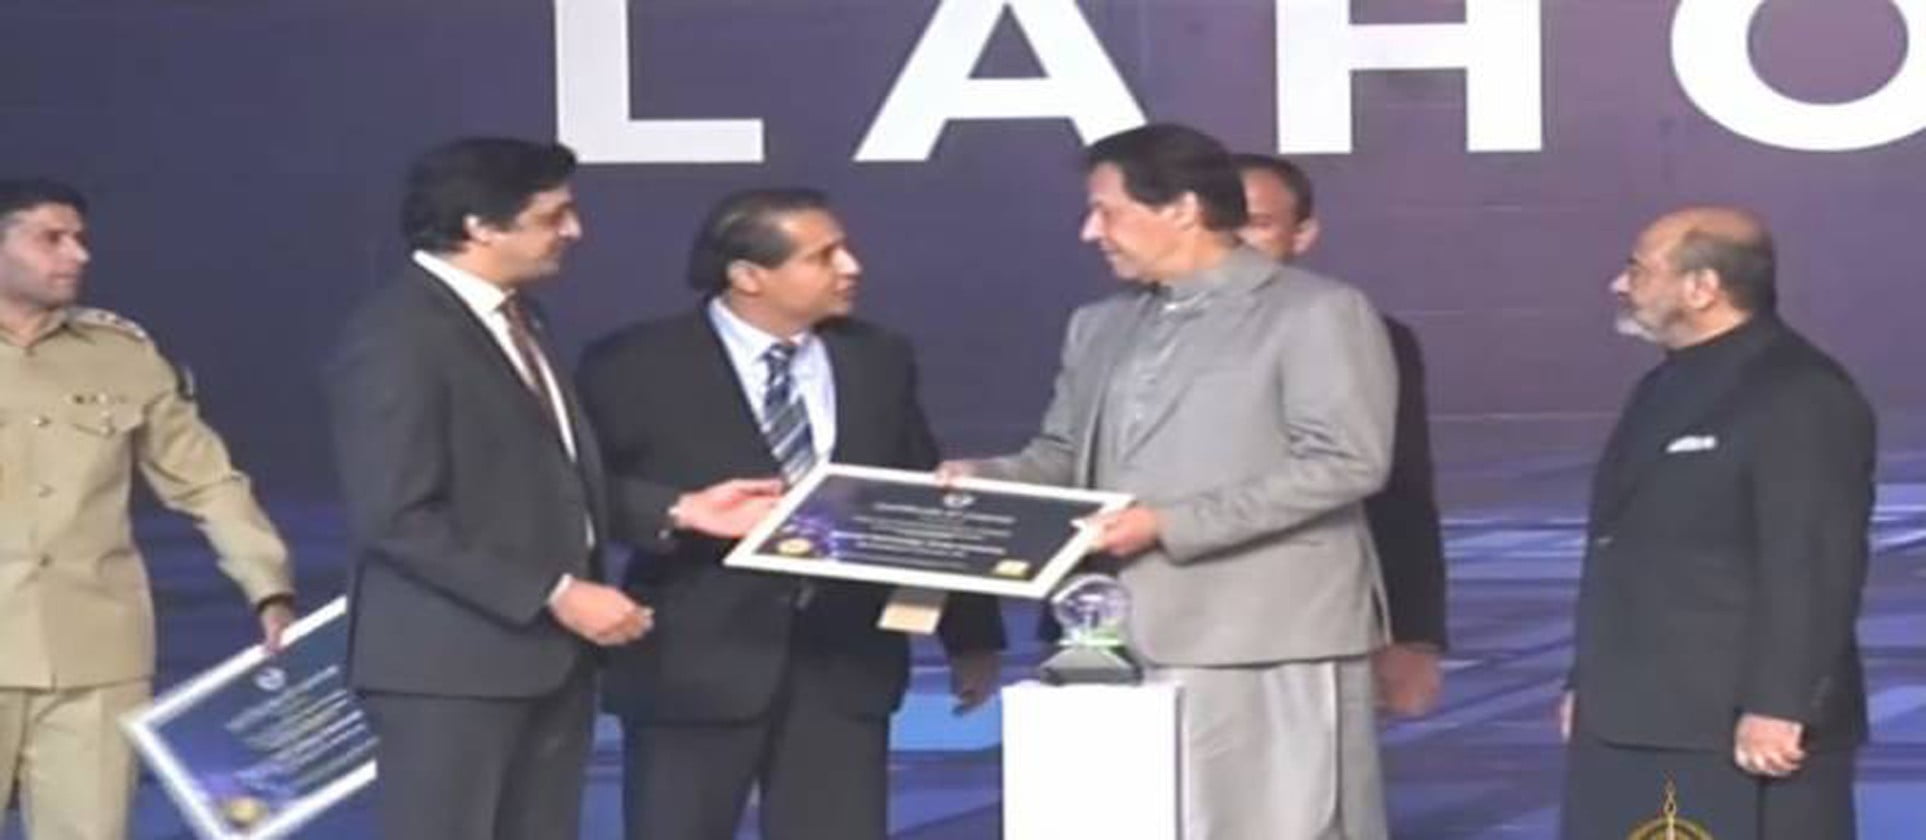 PM Imran Khan Inaugurated “Technopolis” Special Technology Zone in Lahore